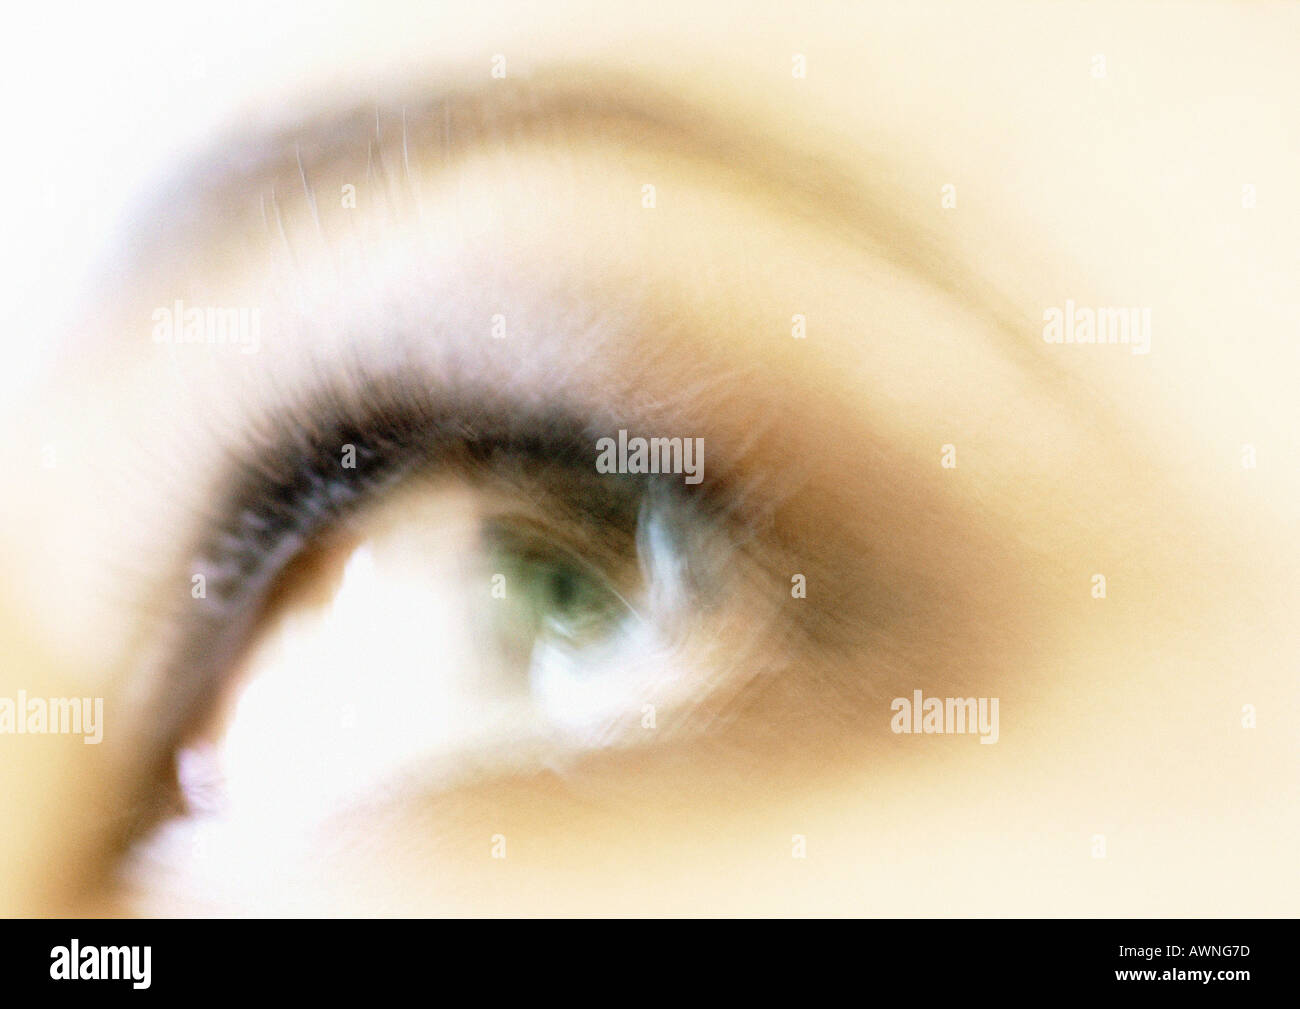 Woman's eye looking away, blurred close up. Stock Photo